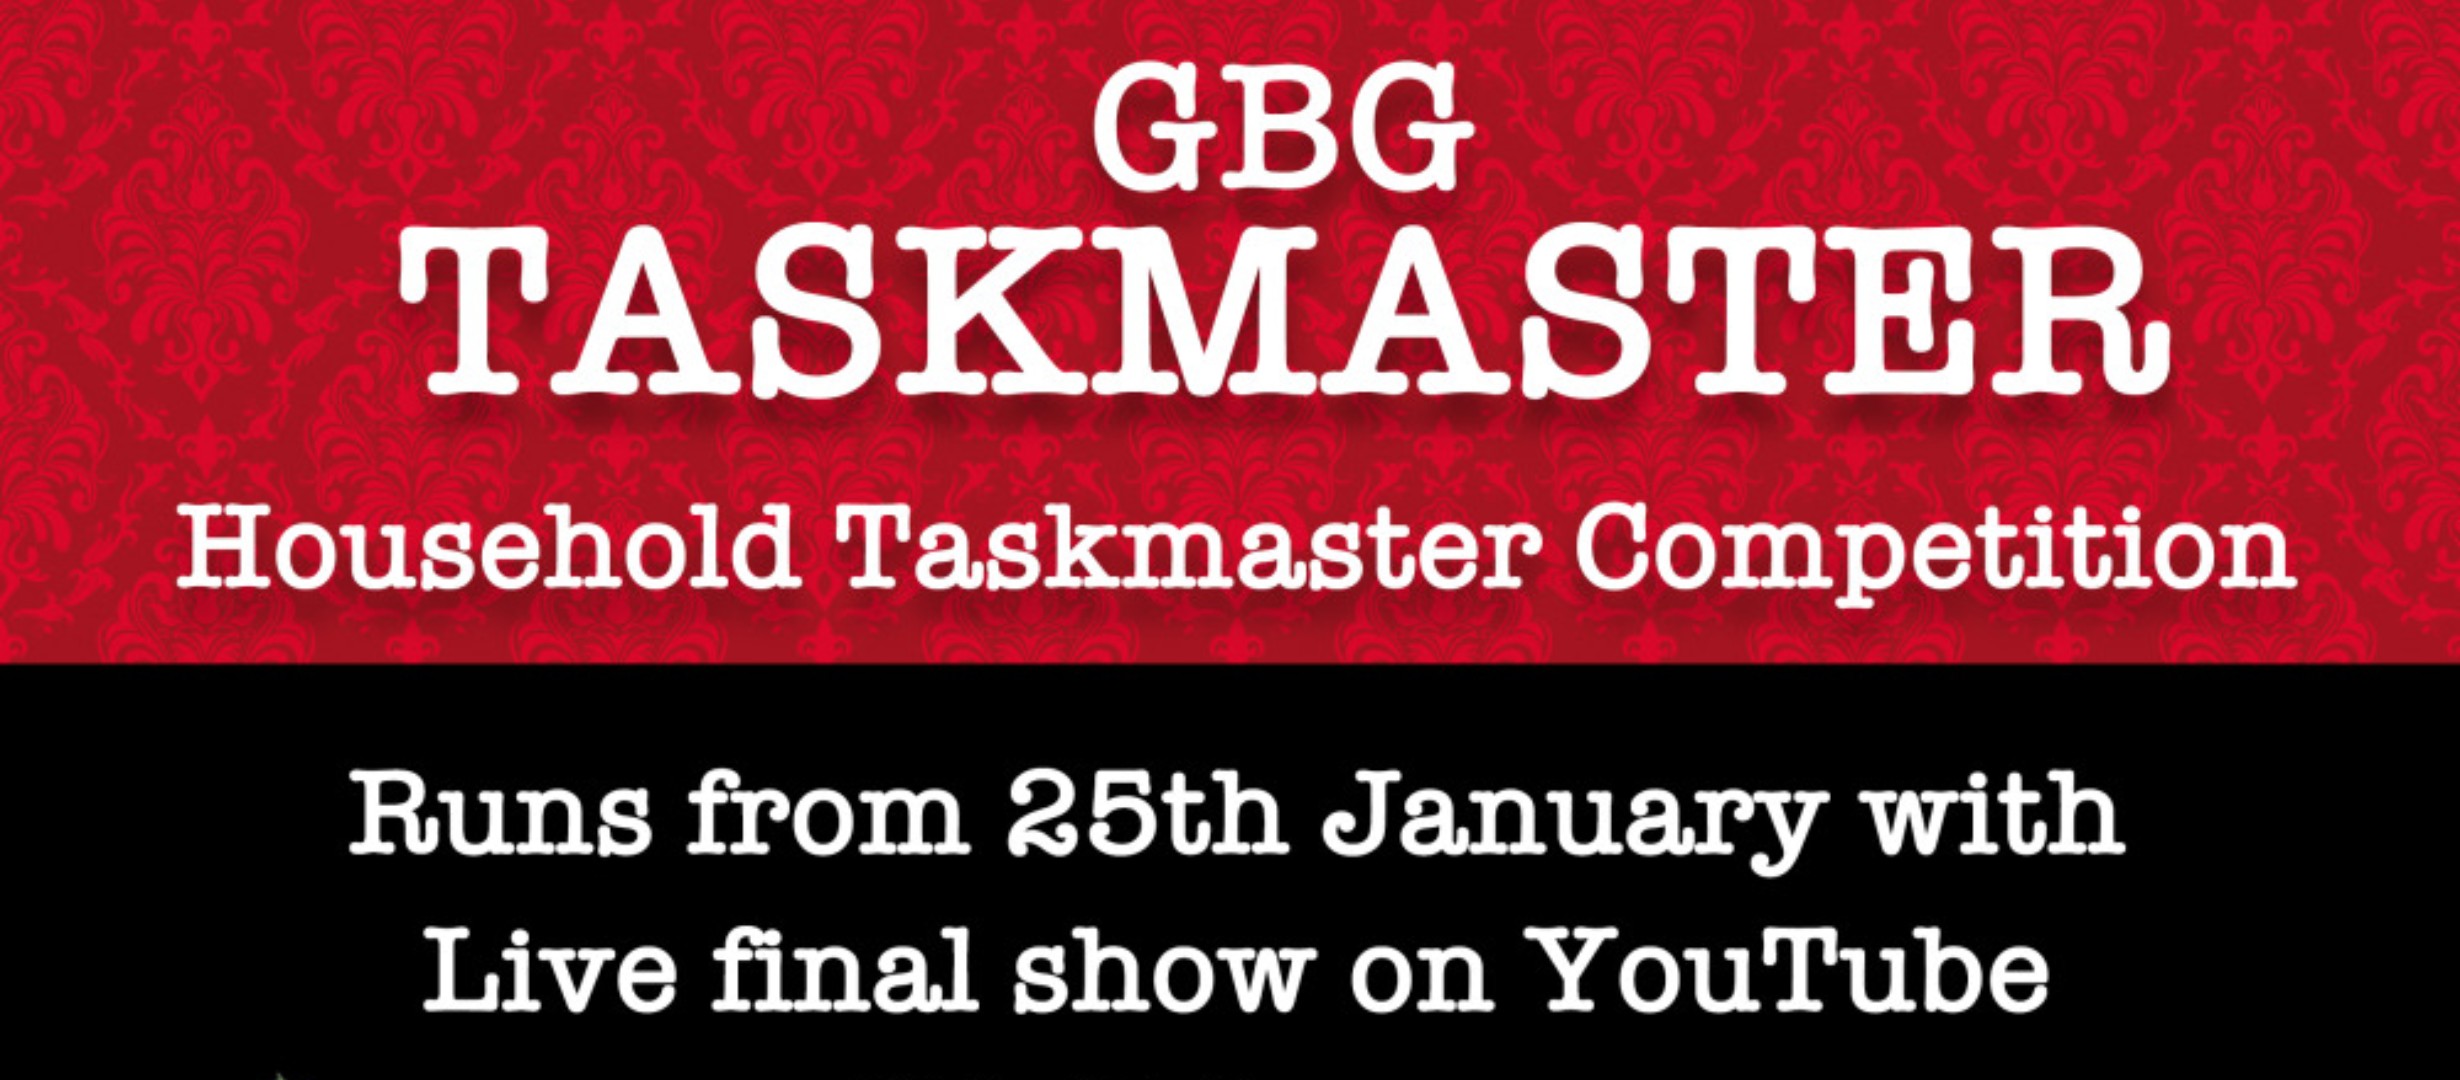 text reads 'GBG taskmaster. Household taskmaster competition. Runs from 25th January. Live final show on youtube'